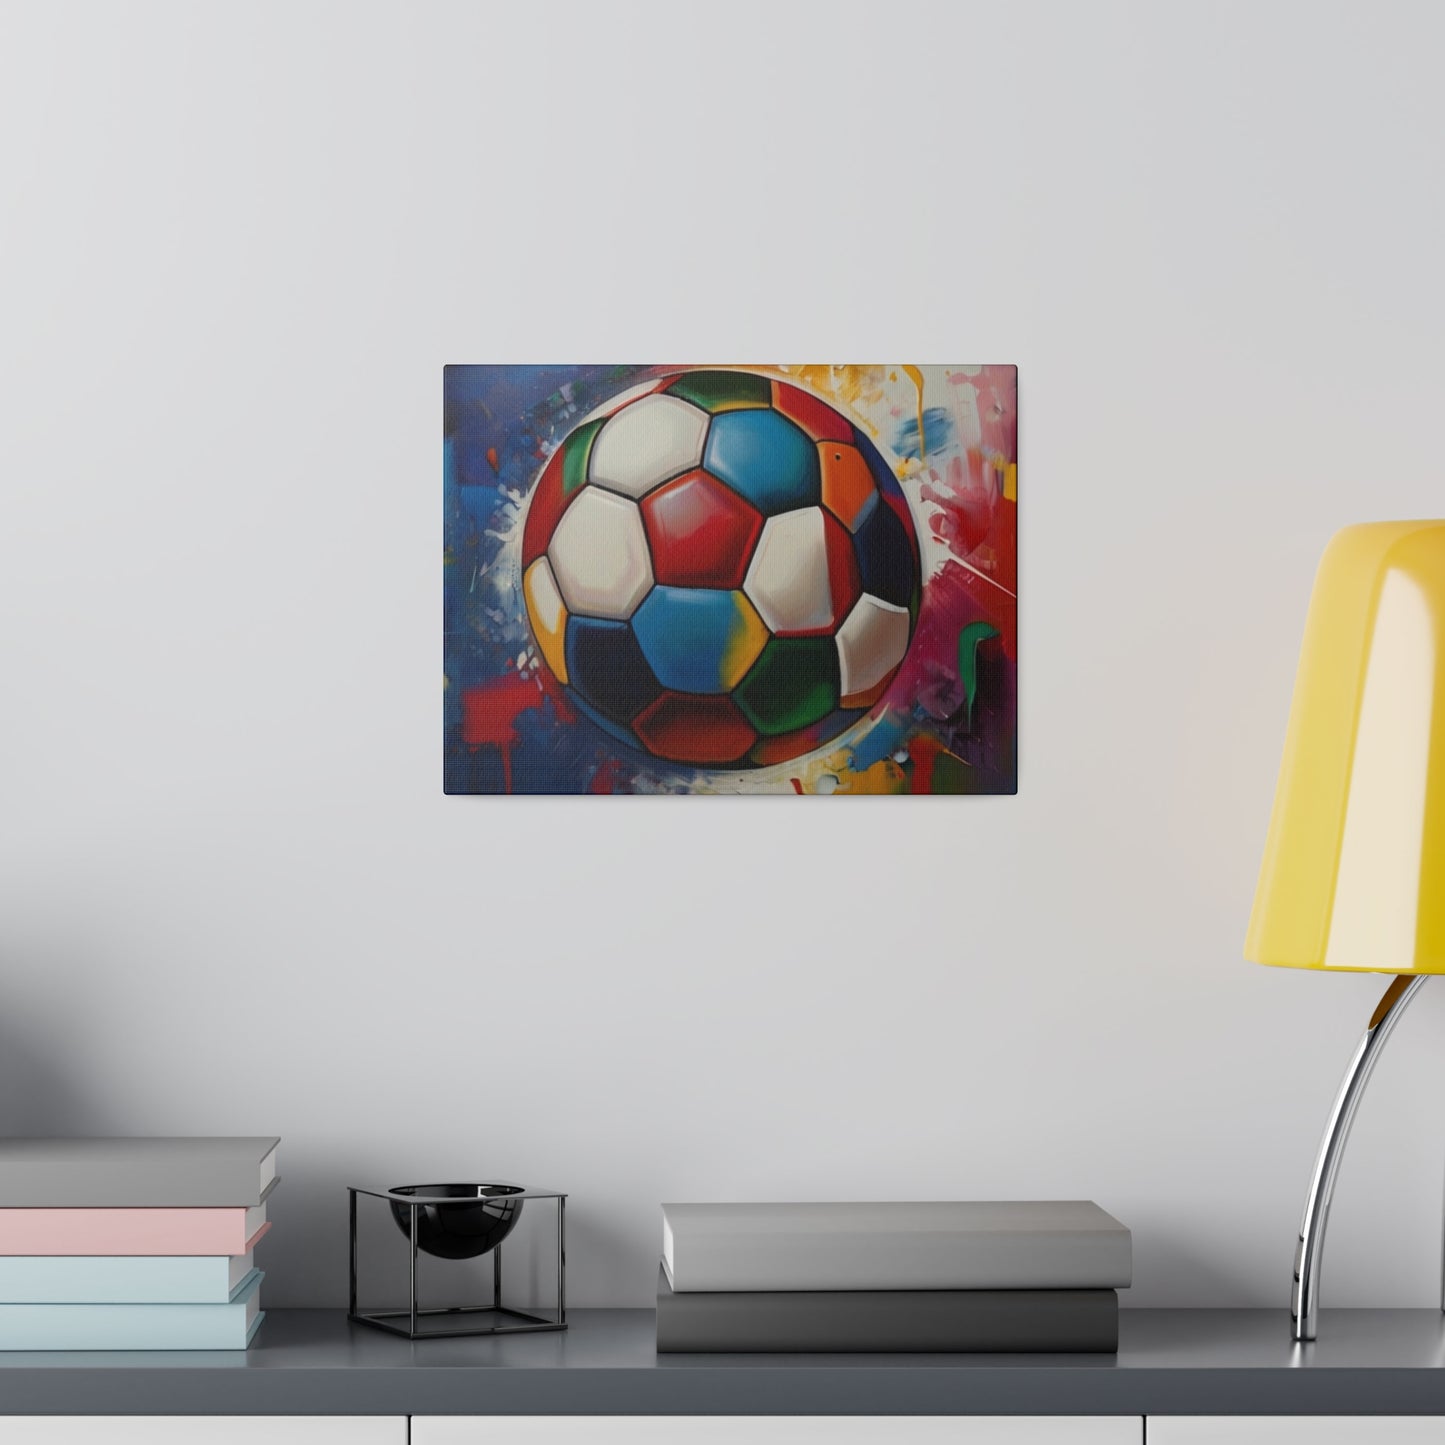 Colourful Football - Matte Canvas, Stretched, 0.75"